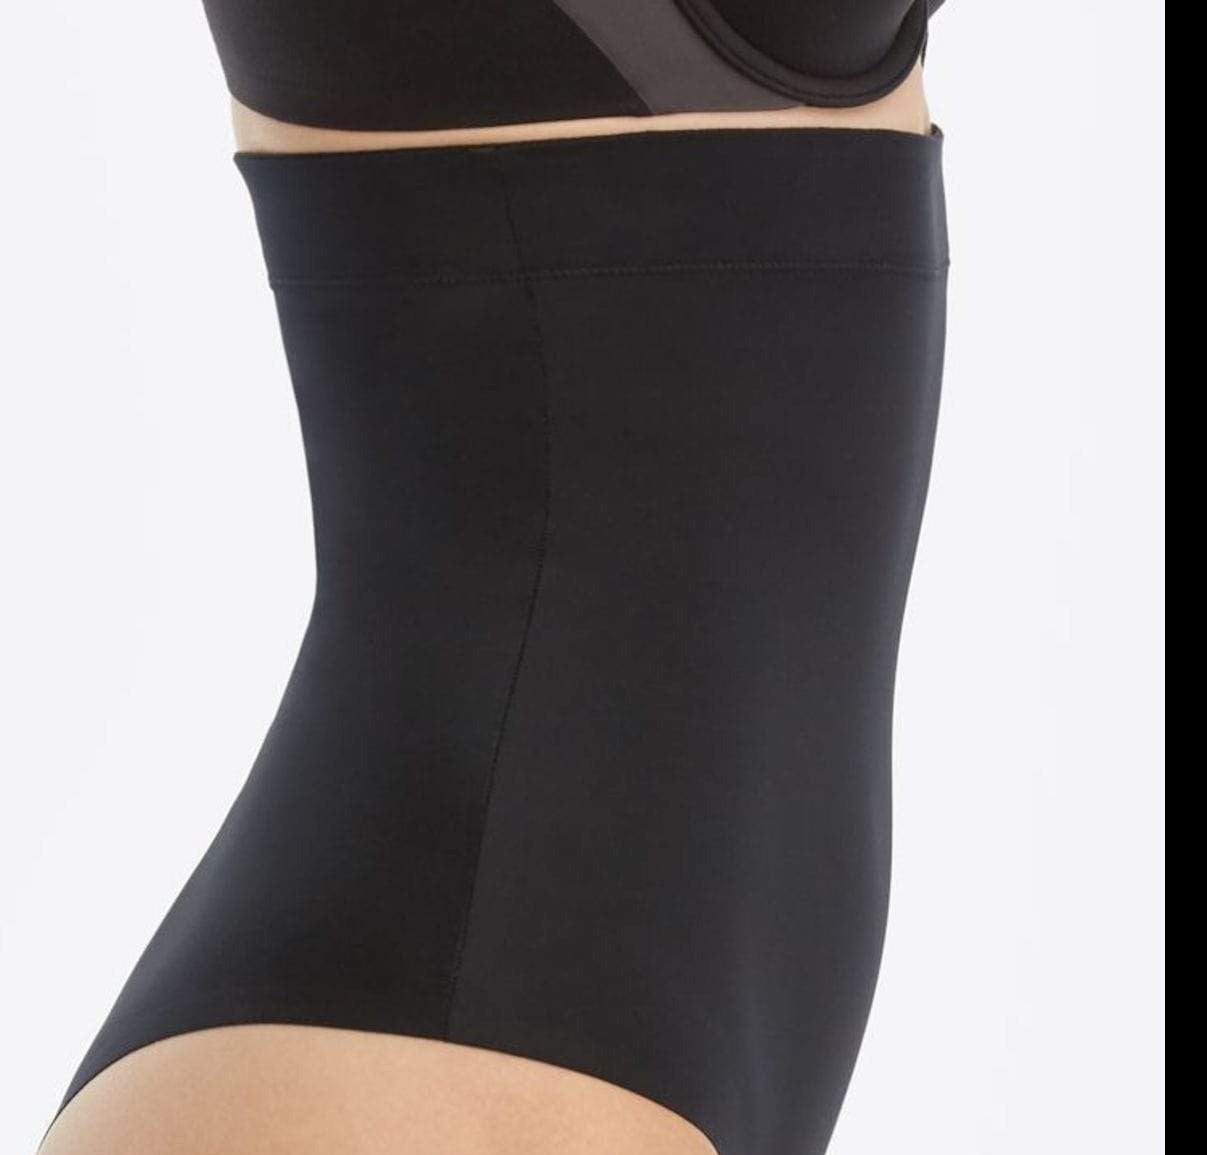 Suit Your Fancy High Waist Thong Very Black